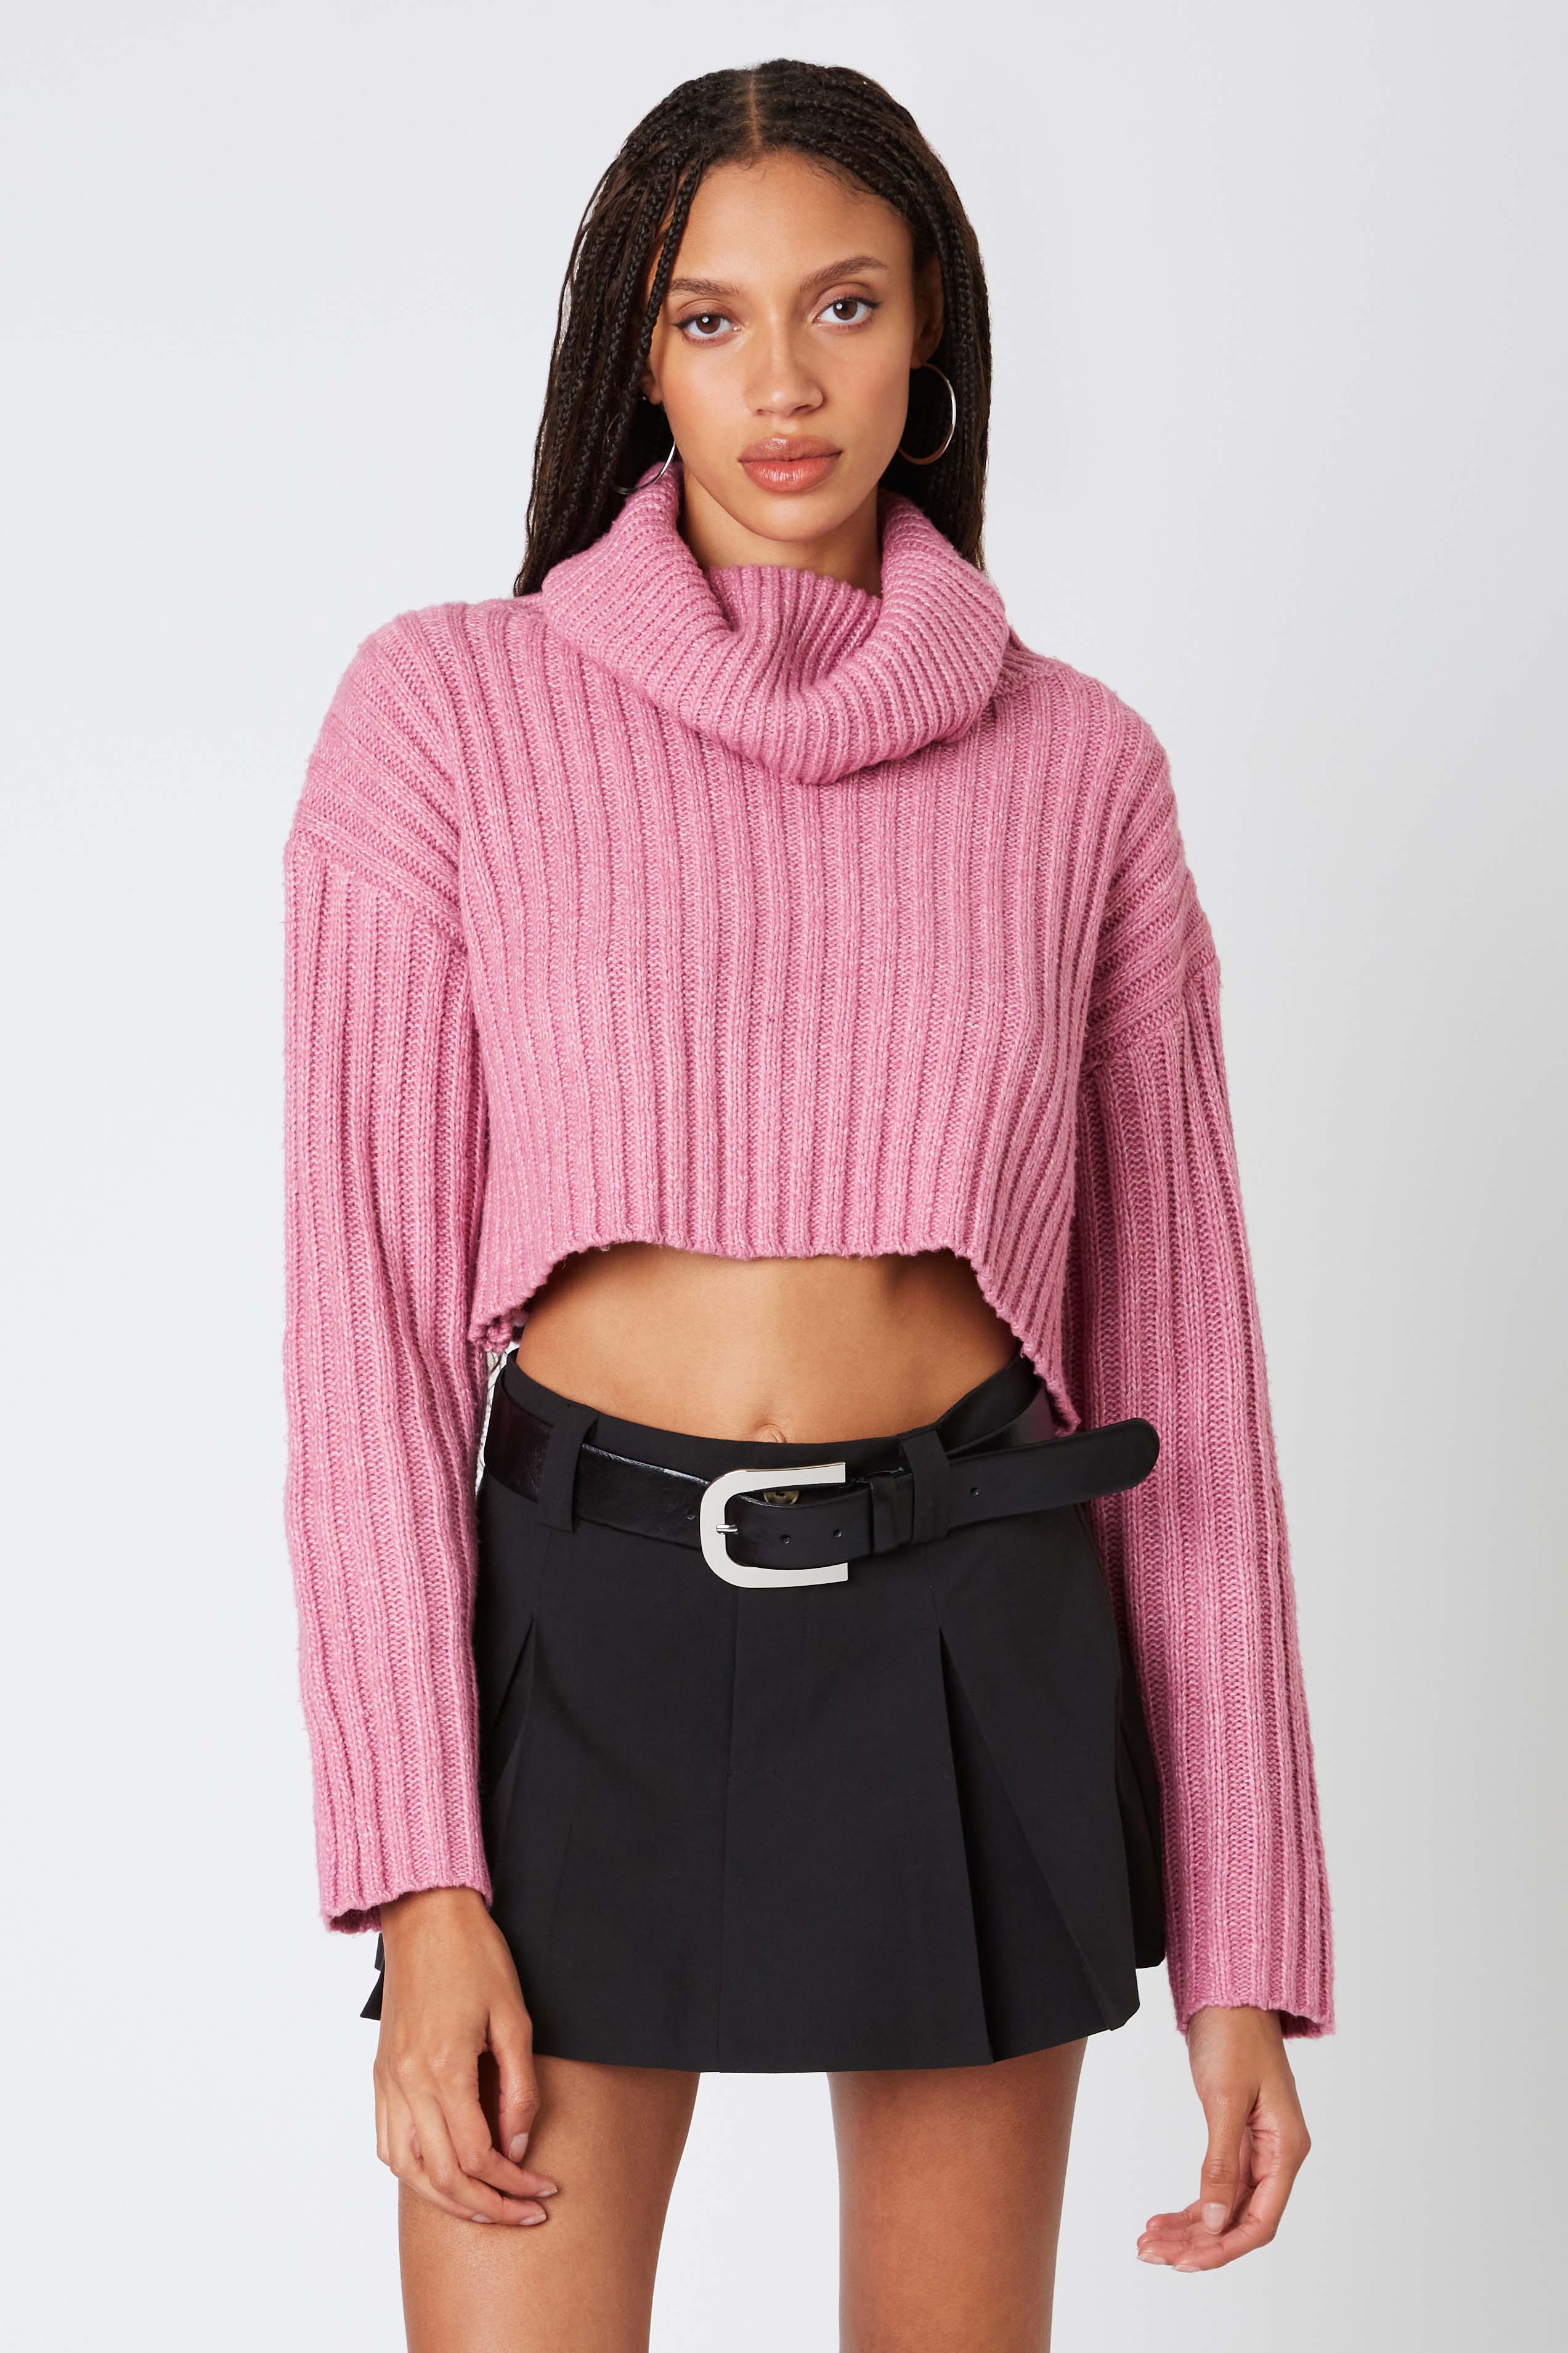 Cropped Turtleneck Sweater in Mauve Front View